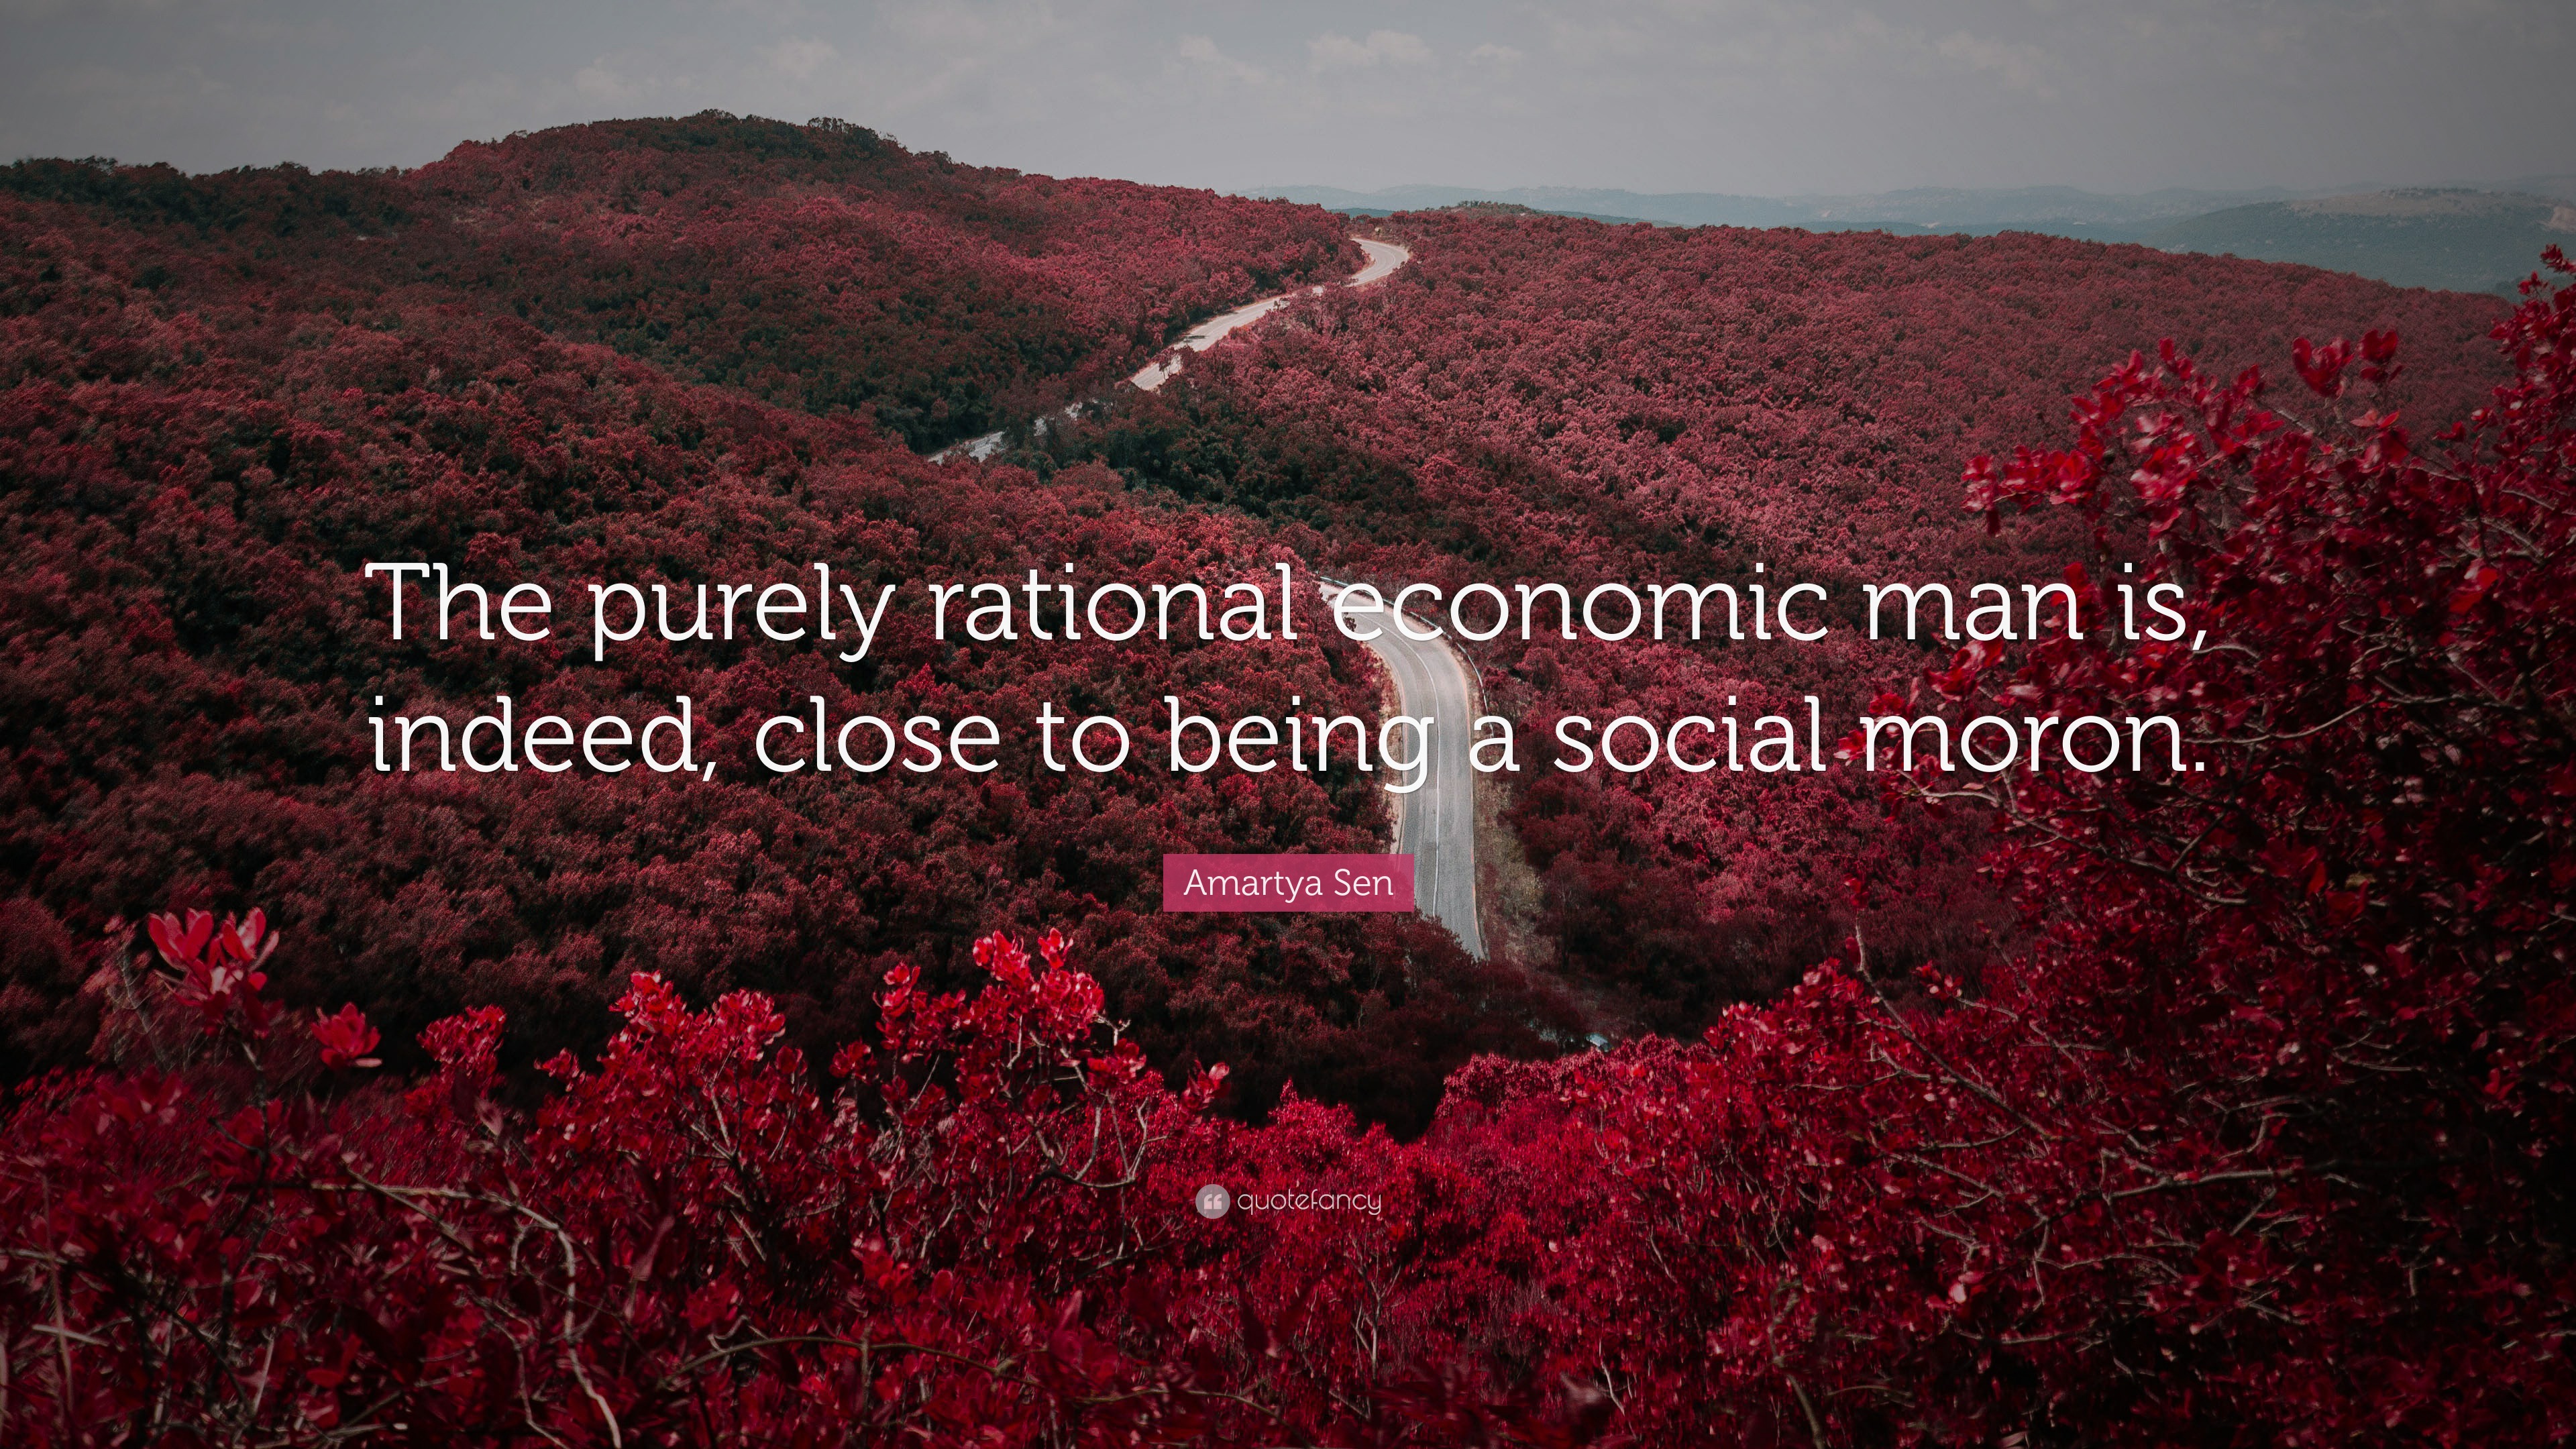 Amartya Sen Quote: “The purely rational economic man is, indeed, close to  being a social moron.”